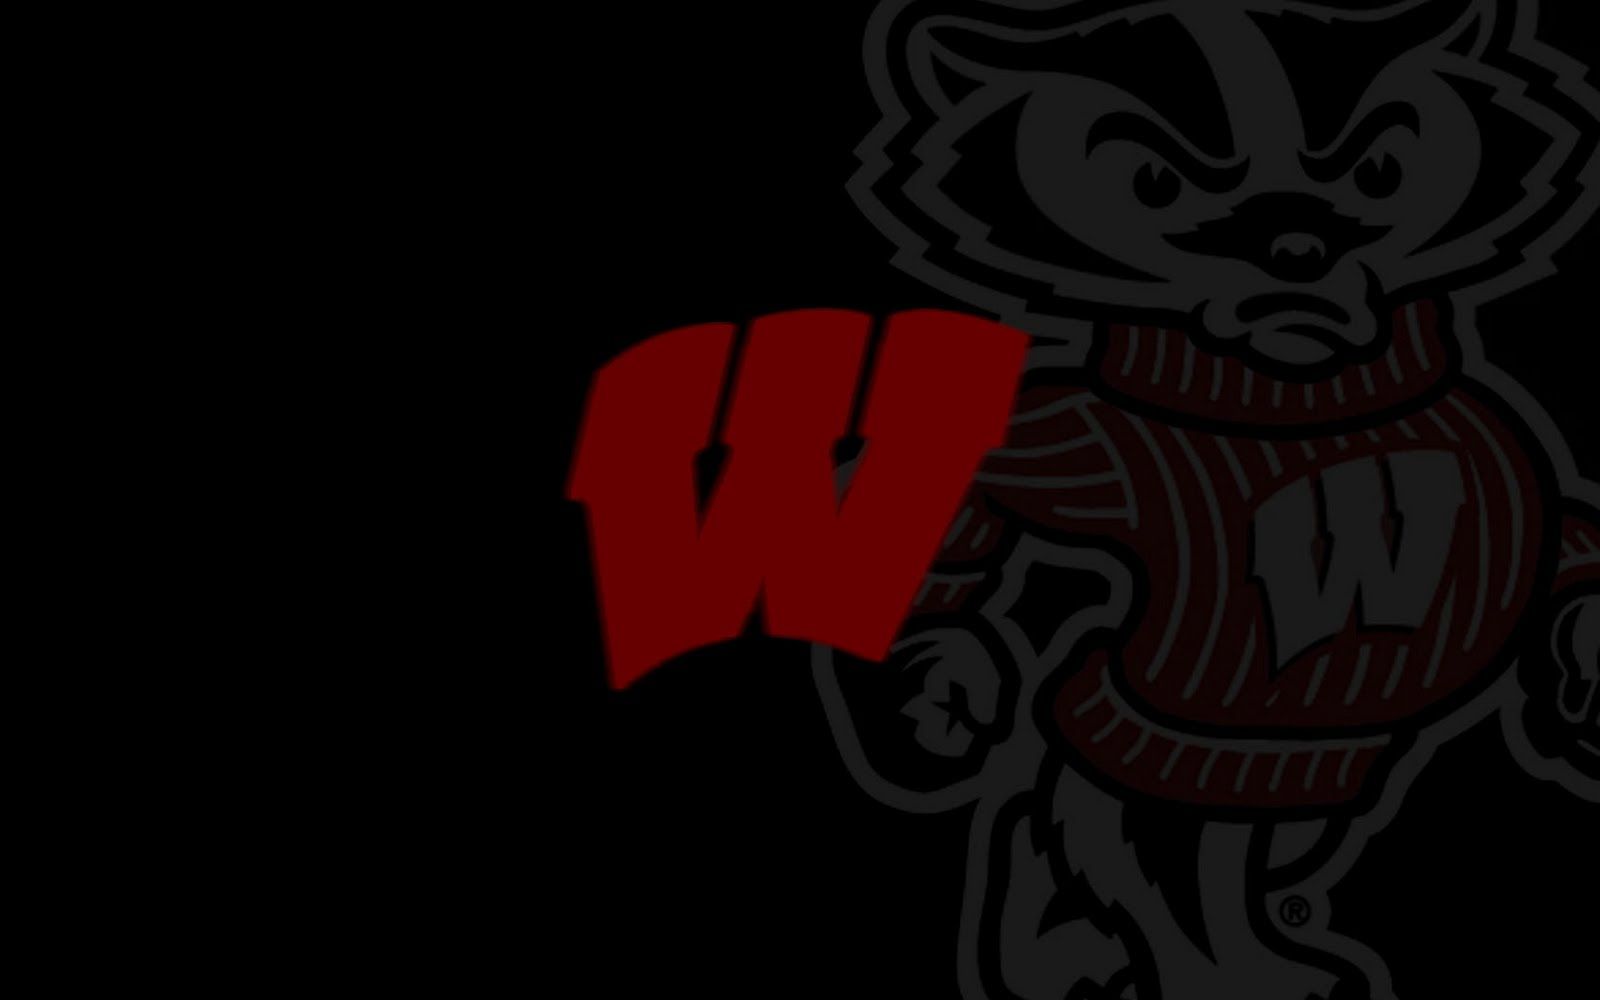 adidas & Wisconsin Unveil Unrivaled Game TECHFIT Football